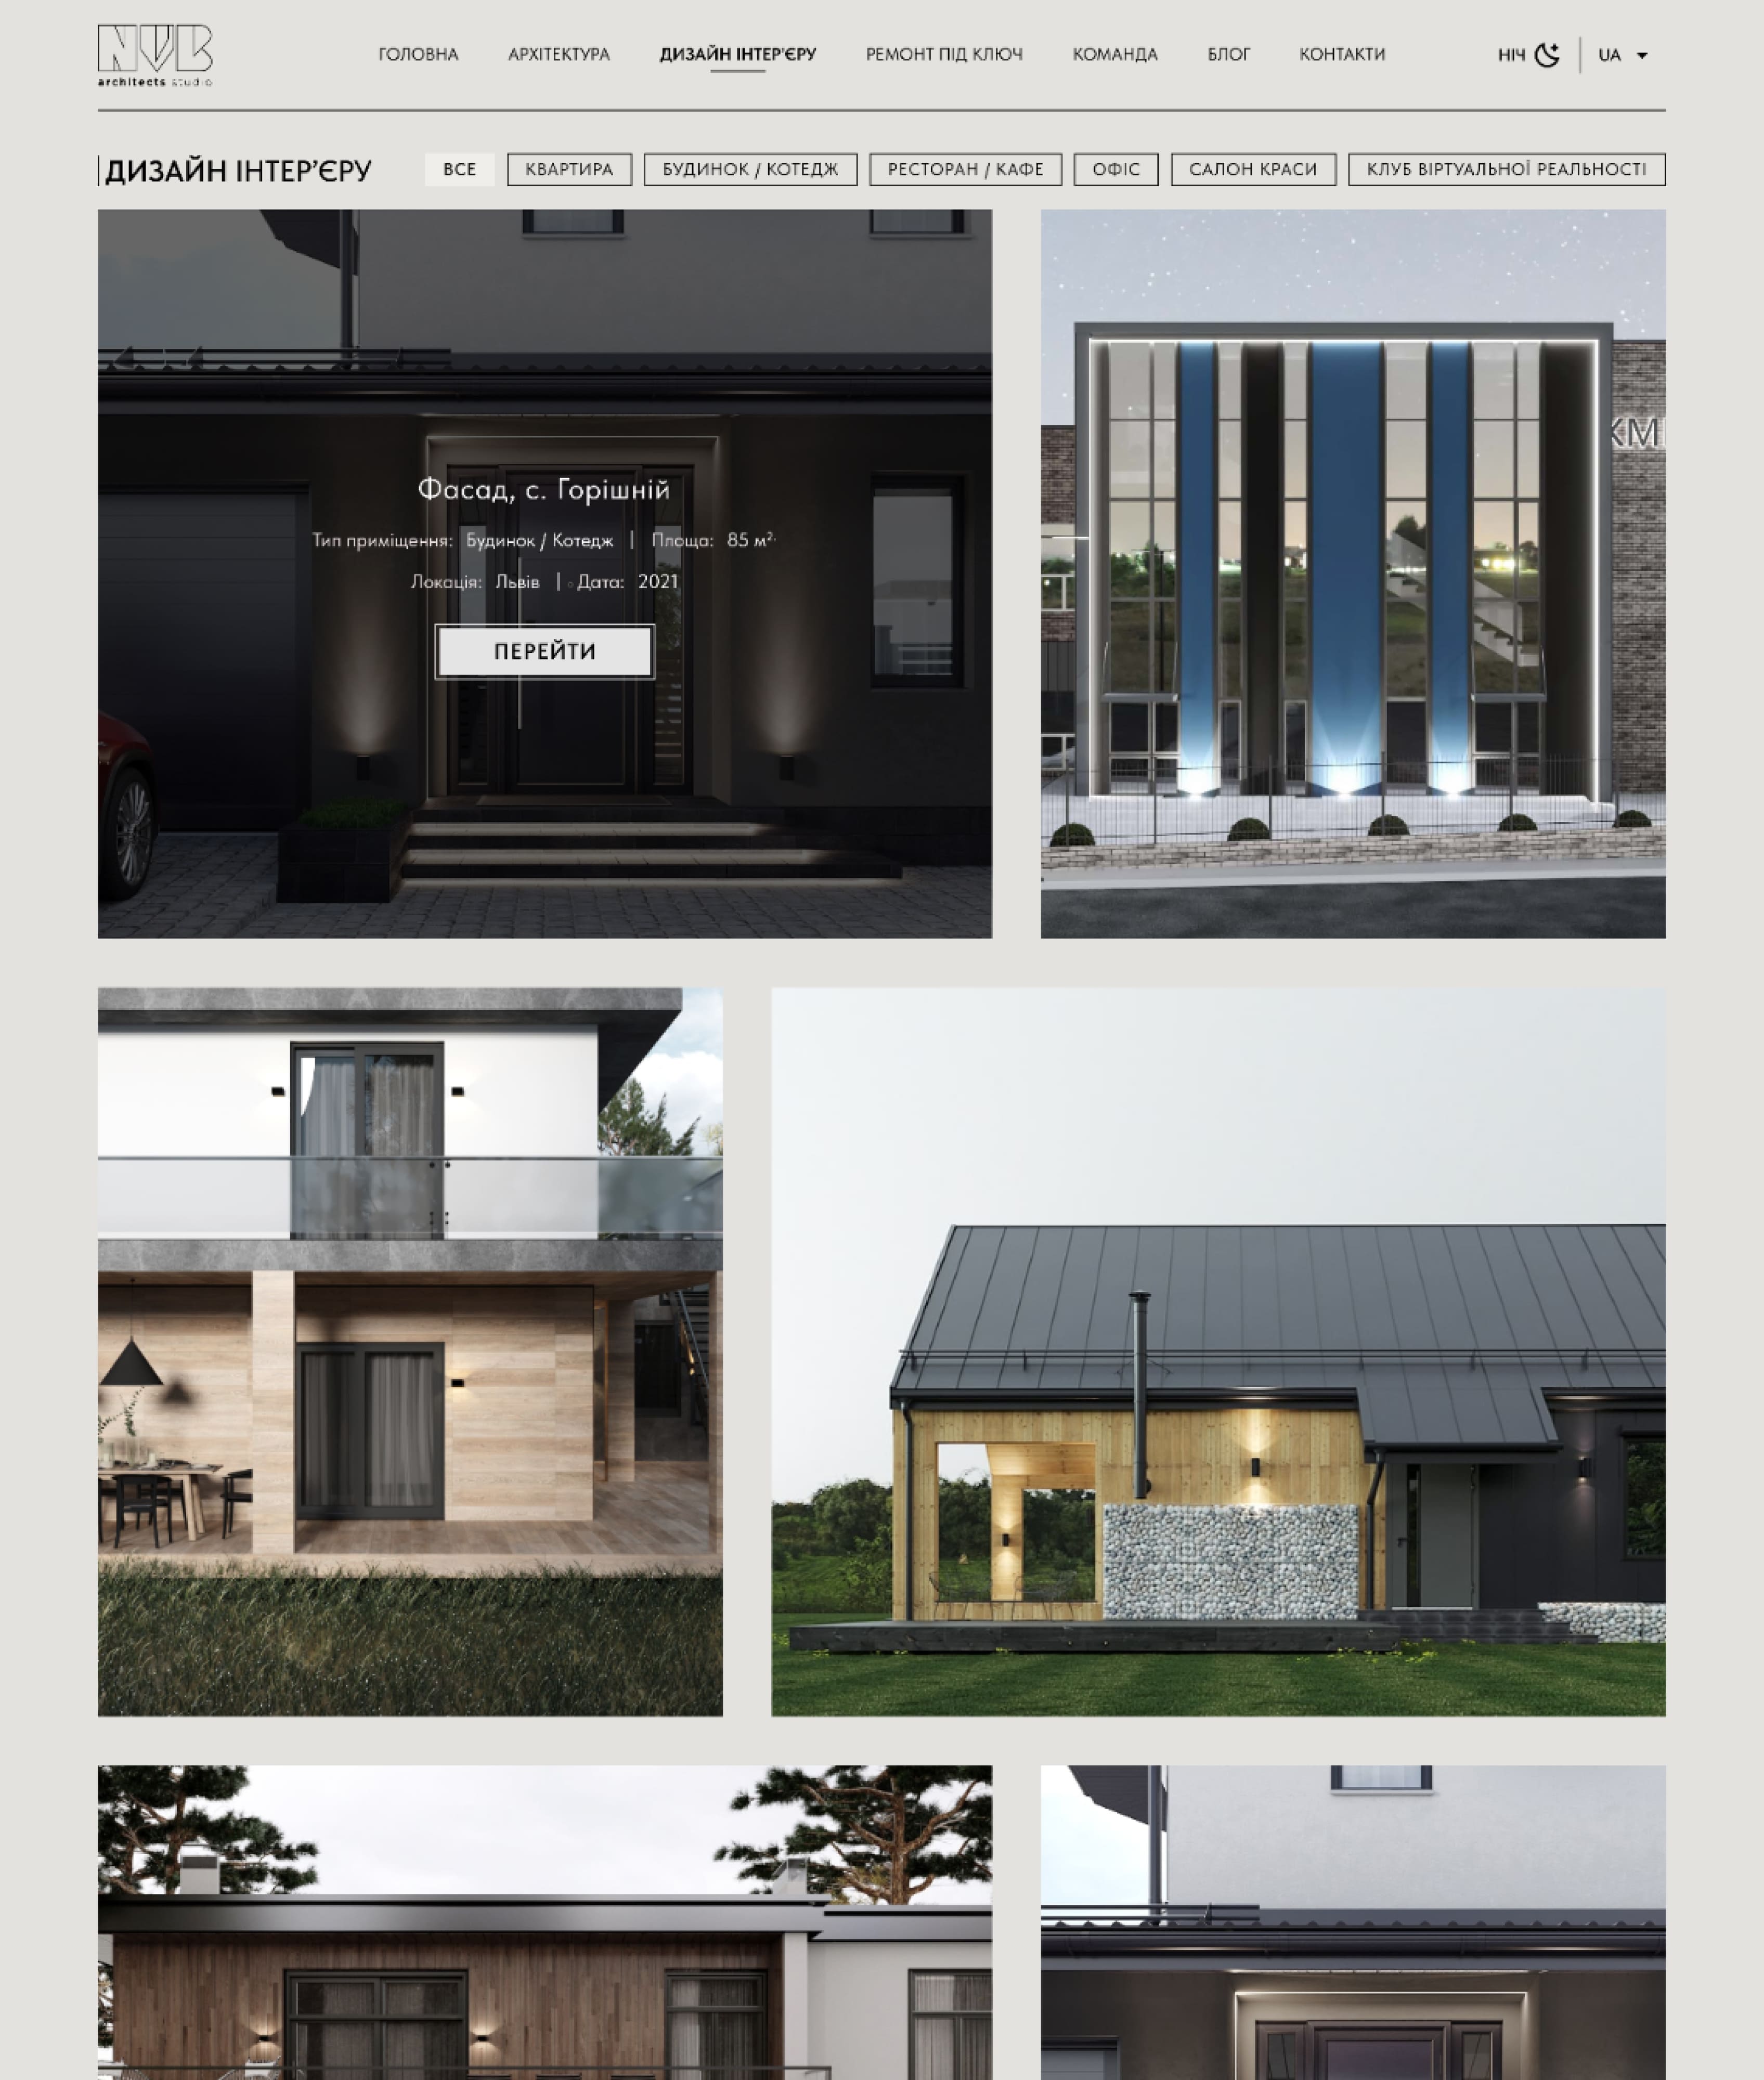 TheUpperCode | Website for NVB architects studio | Ruby on Rails